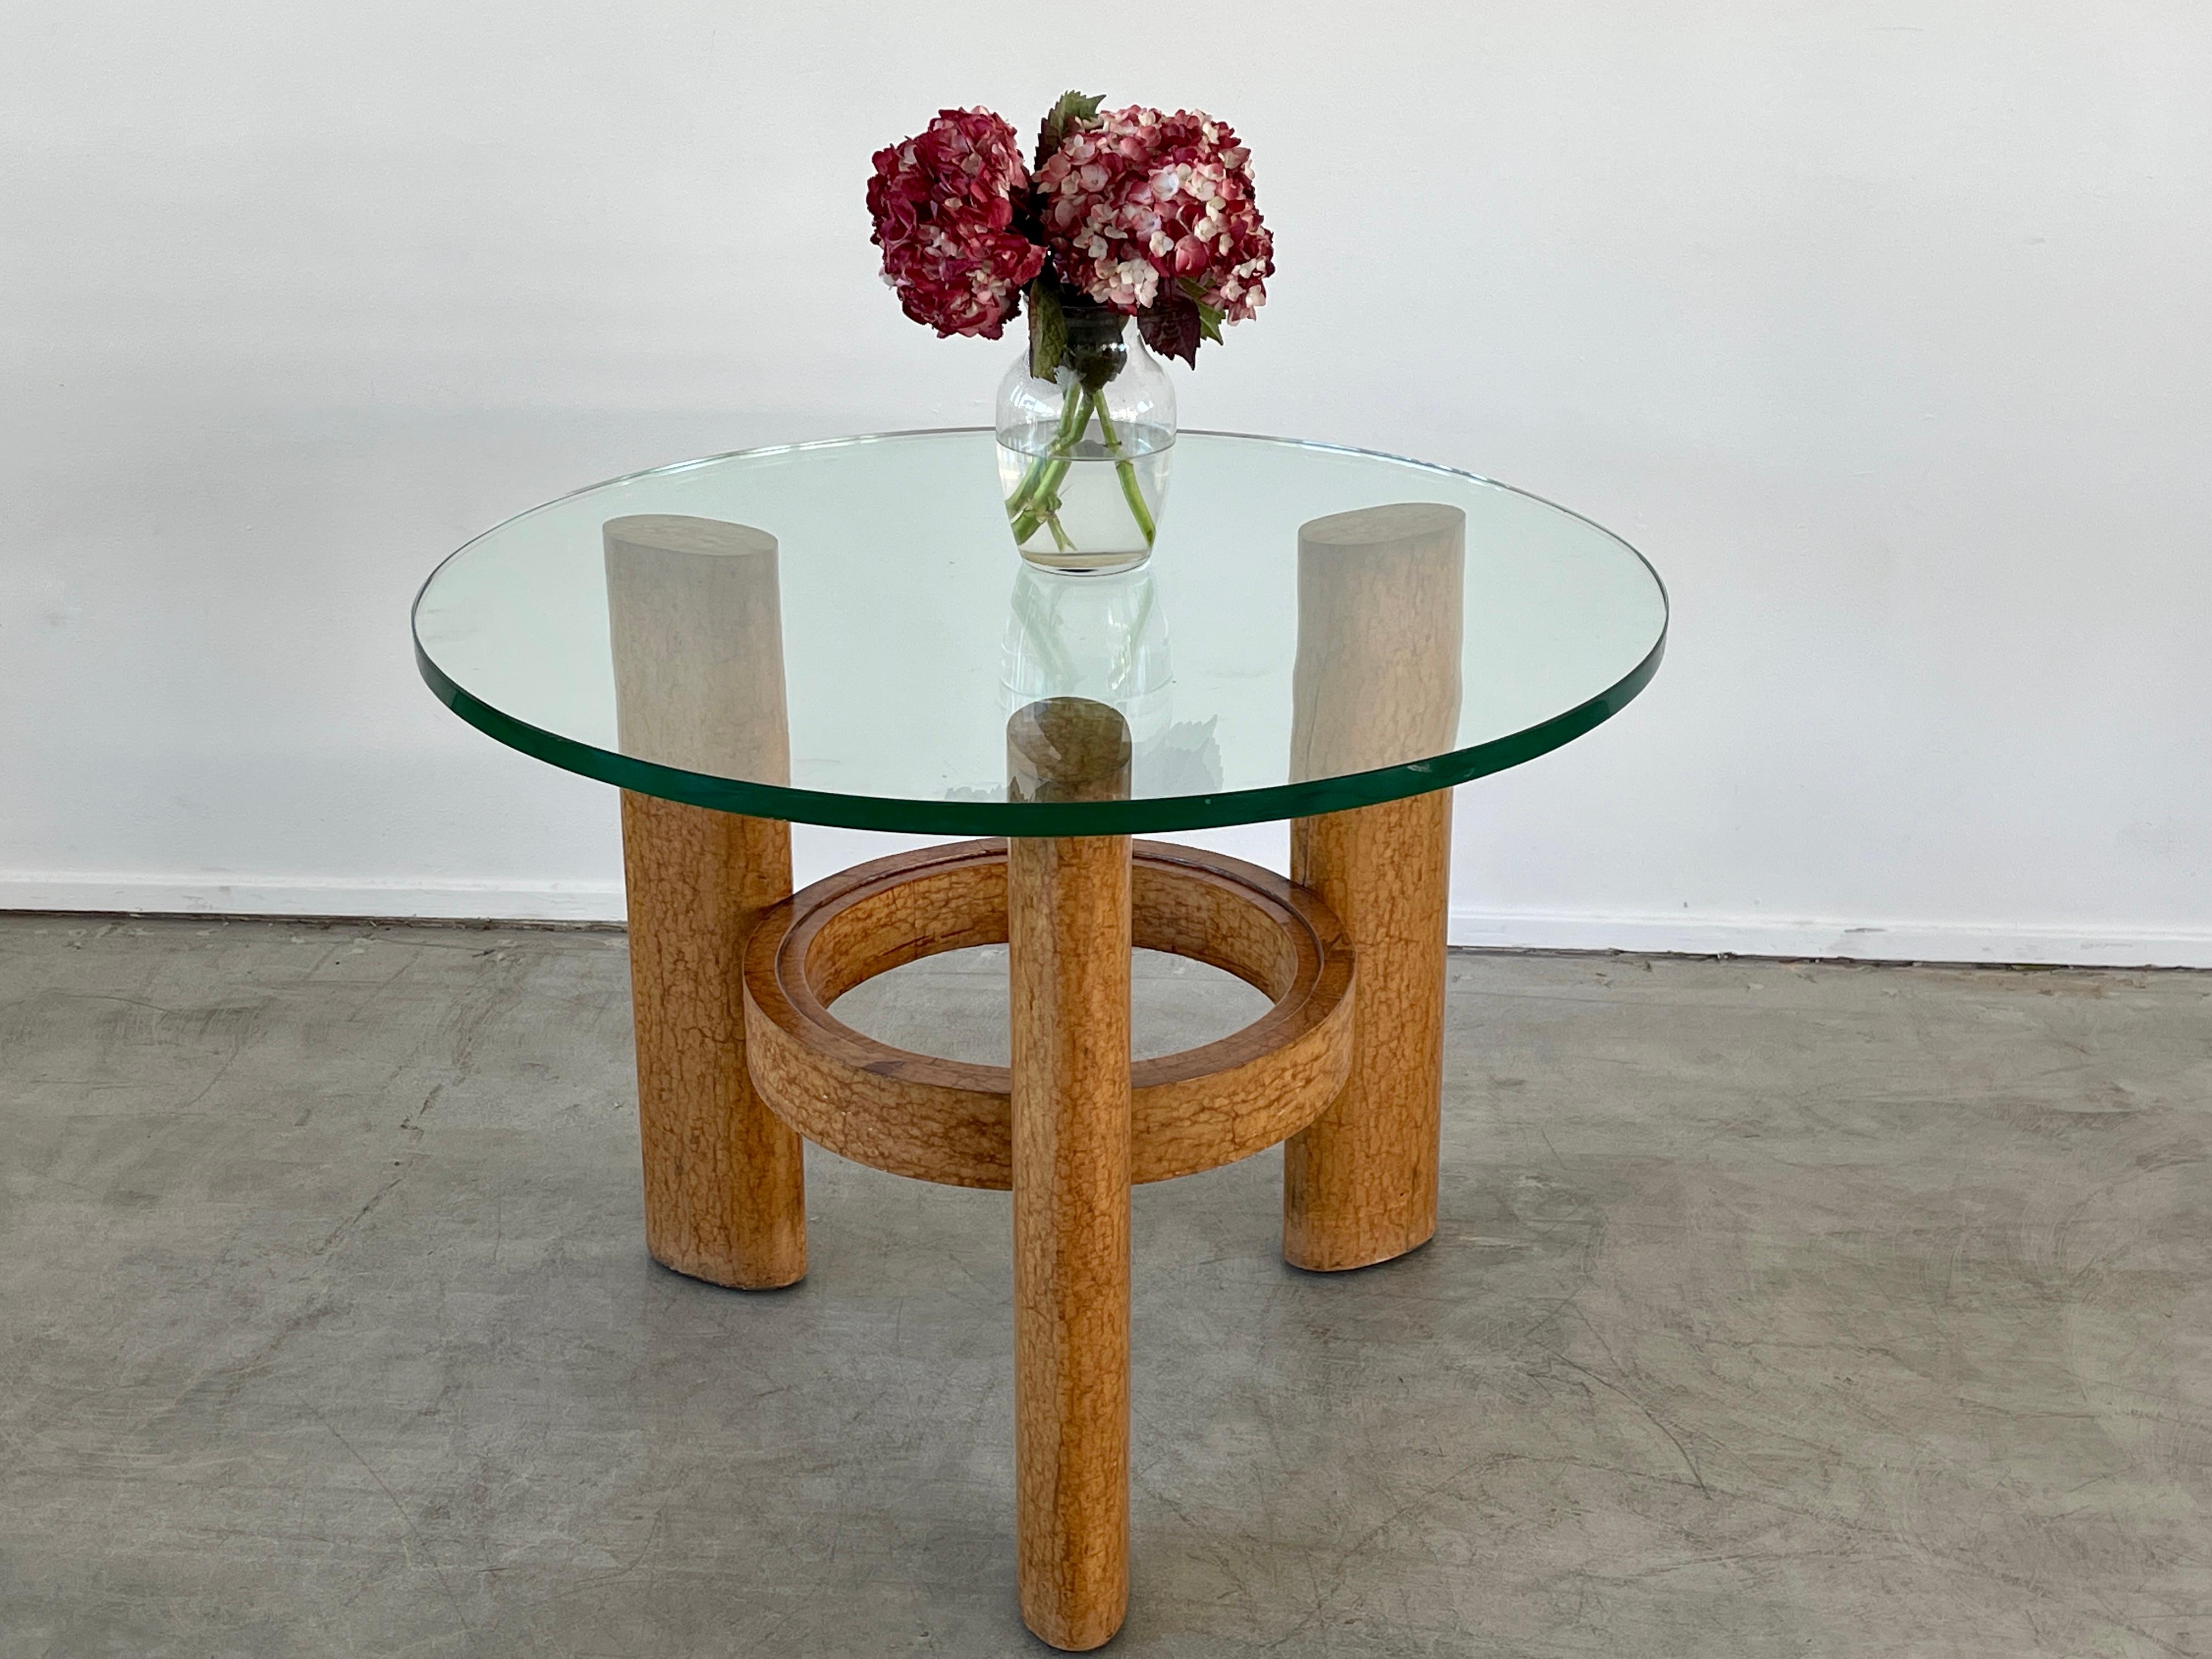 1940's Art Déco tripod coffee table with wooden legs in light briar and original circular glass top. 
Italy, 1940s.